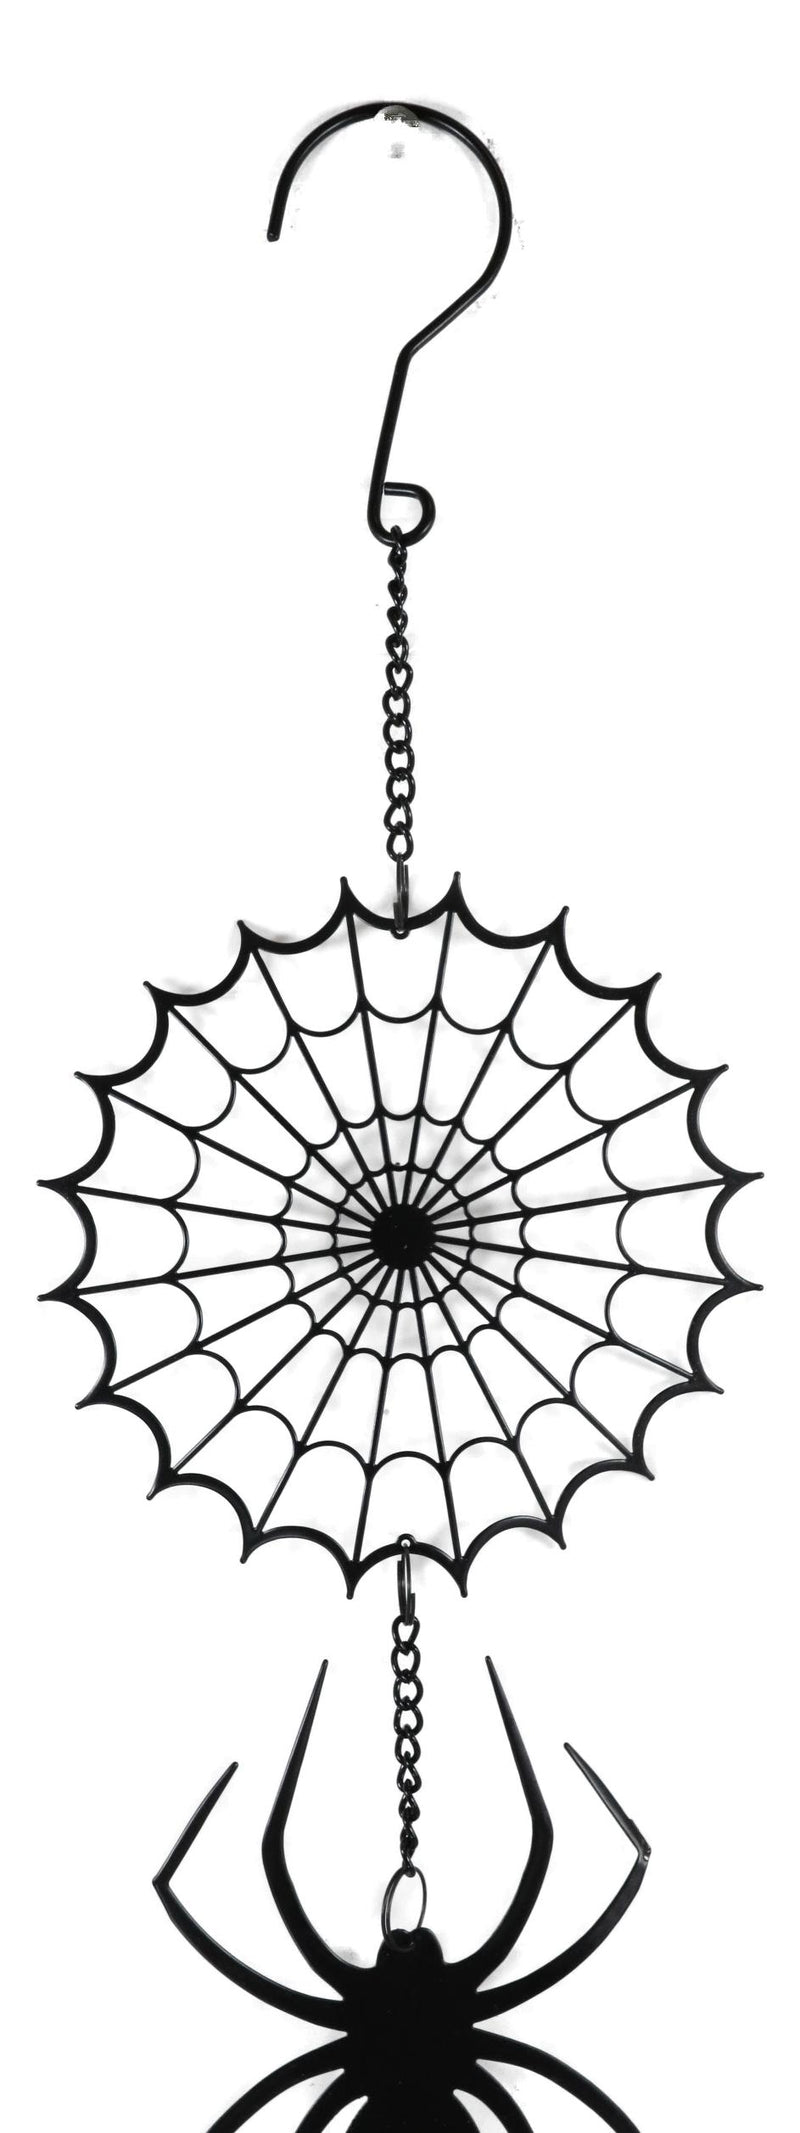 Gothic Arachnid Spider Web Cobweb Metal Wall Hanging Mobile Wind Chime W/ Beads